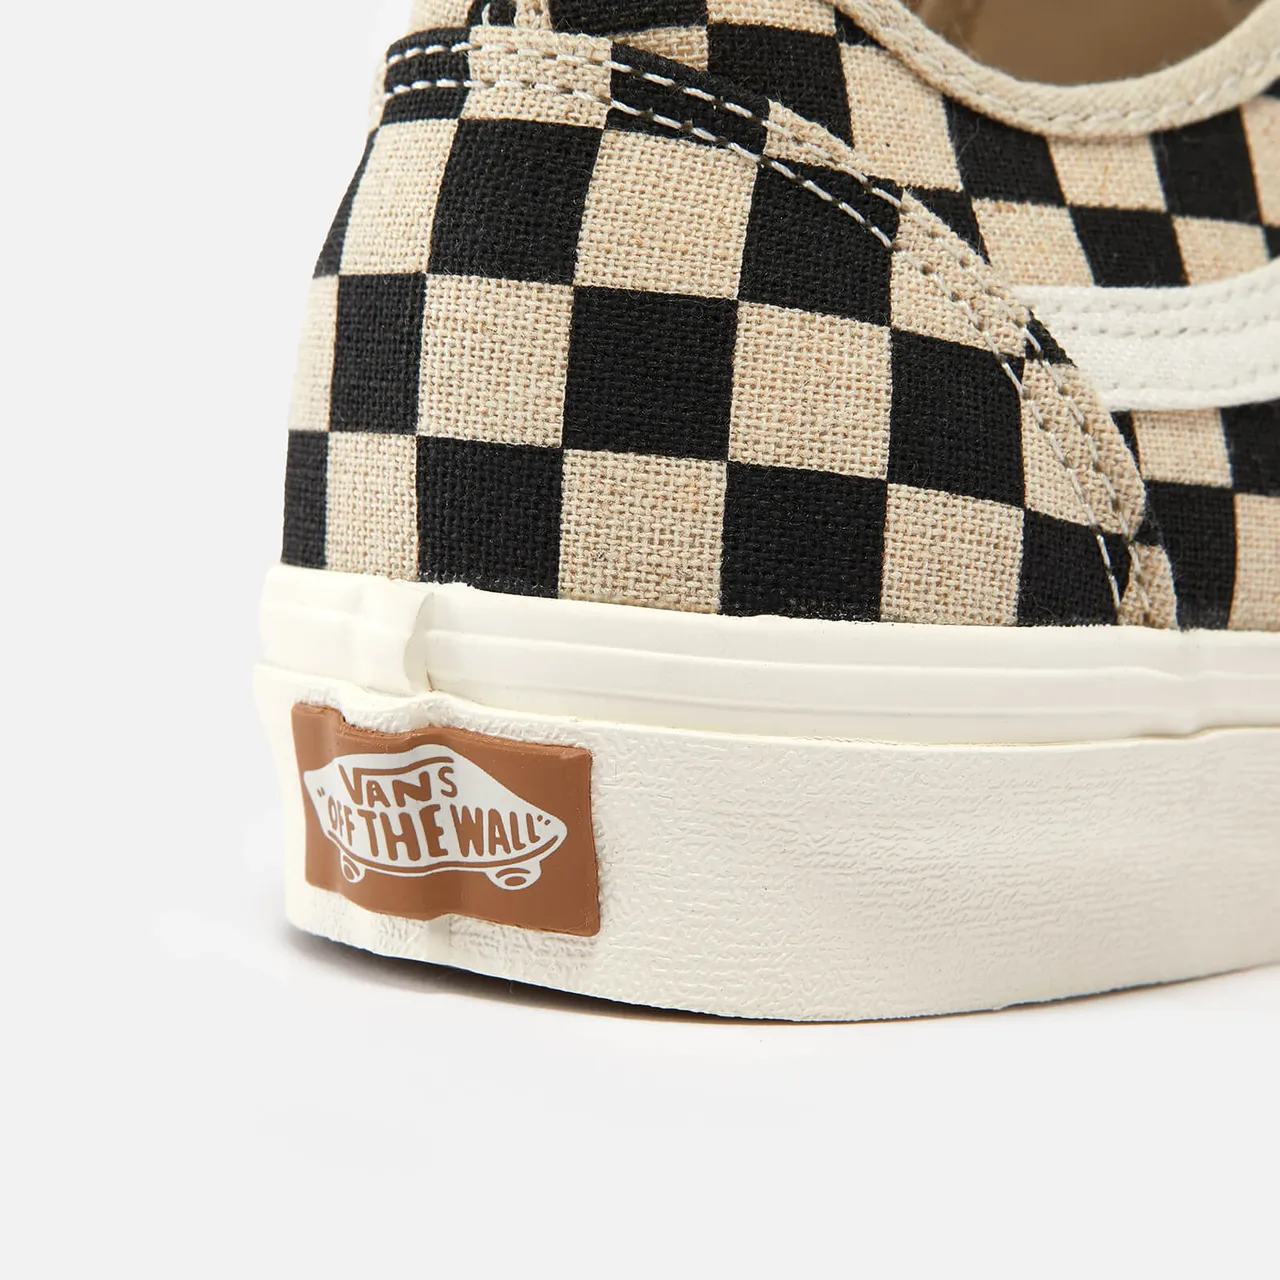 Vans Eco Theory Checkerboard Old Skool Trainers